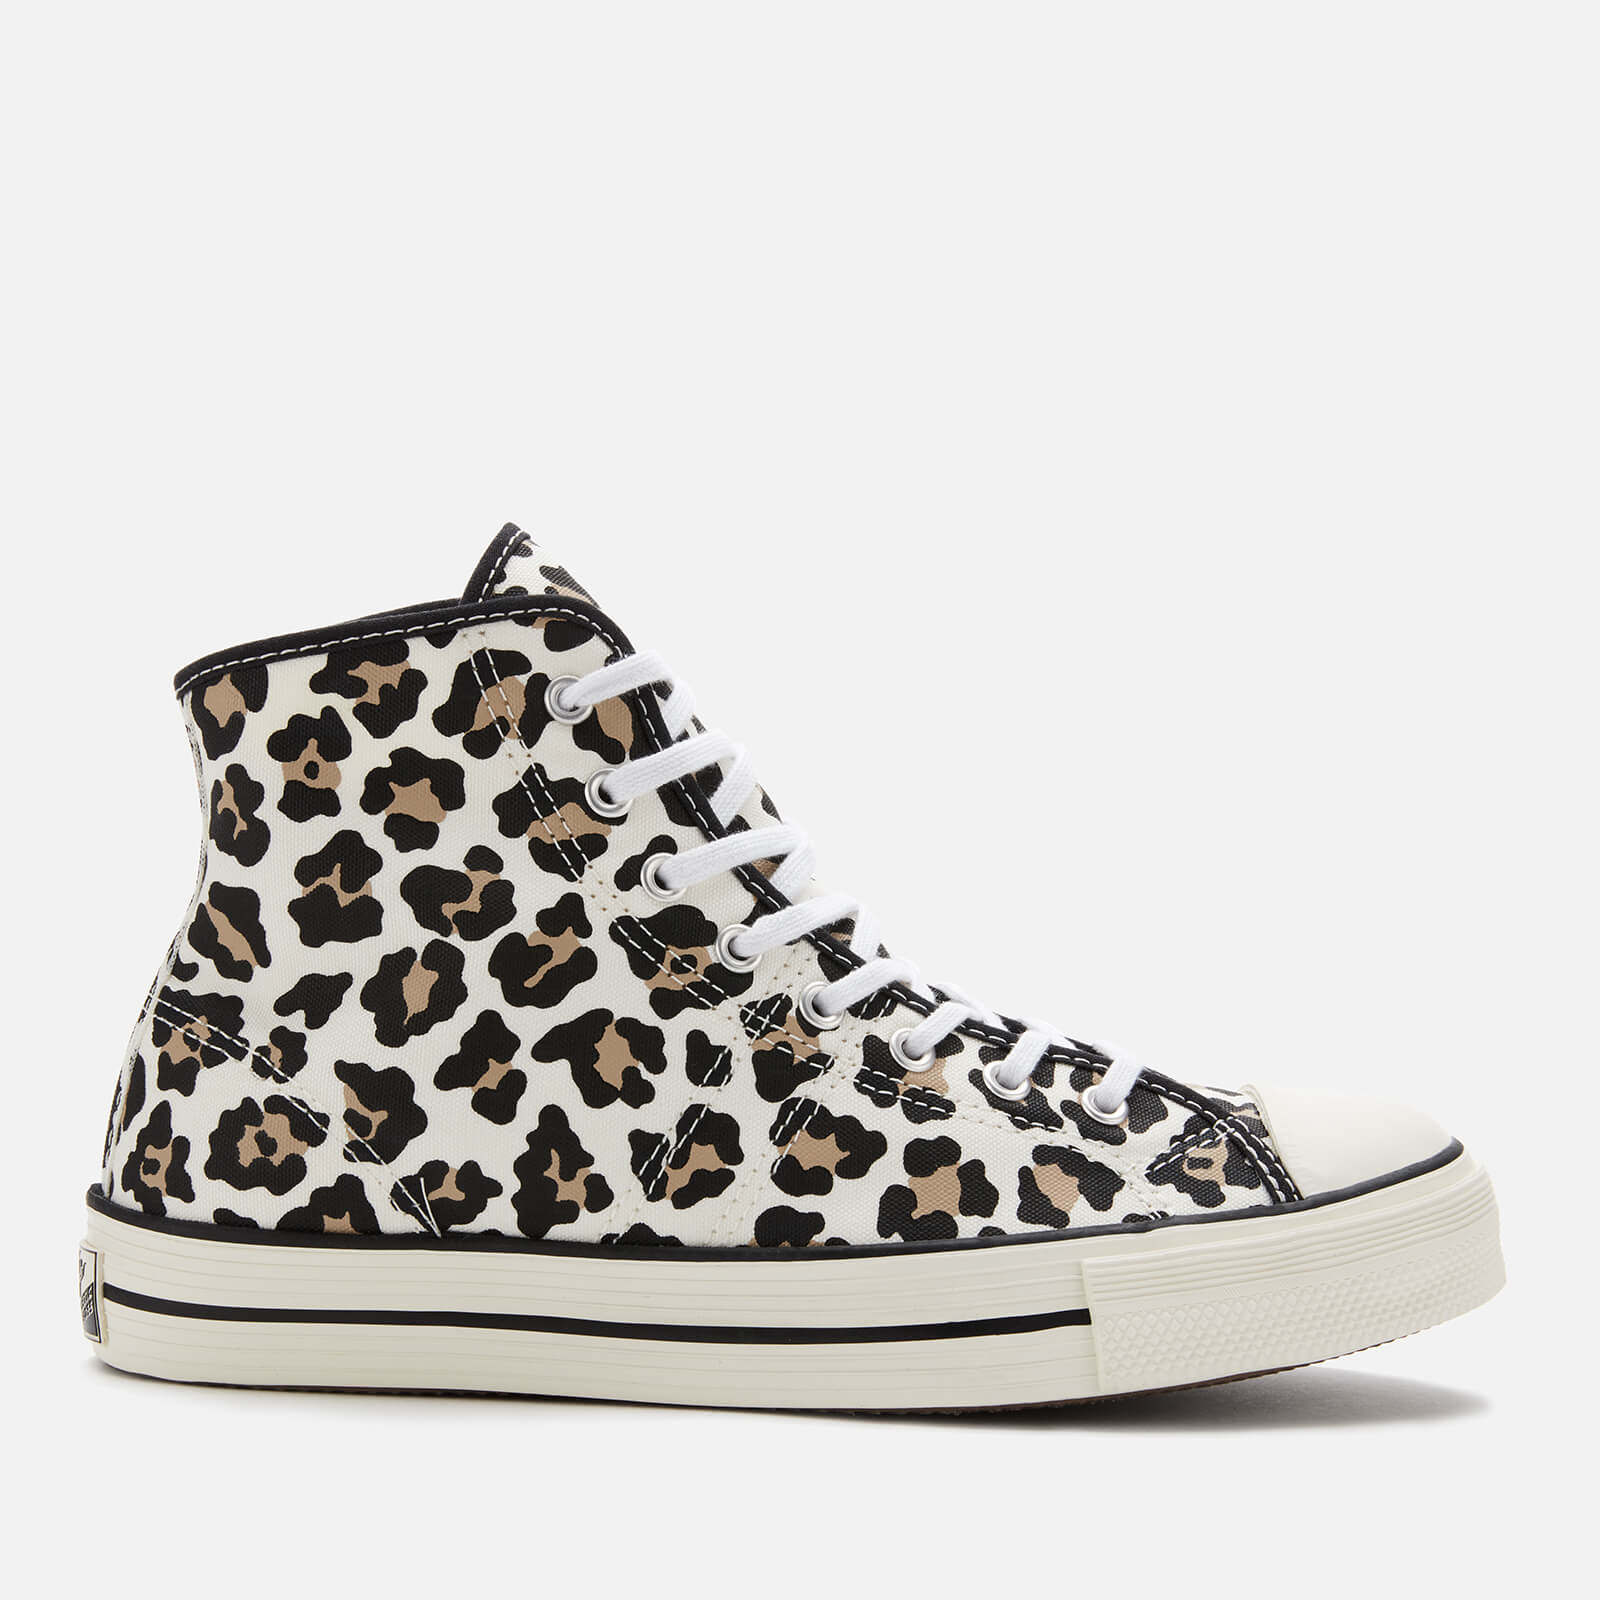 Converse Archive Print Lucky Star Hi-Top Trainers - Driftwood/Light Fawn/Black